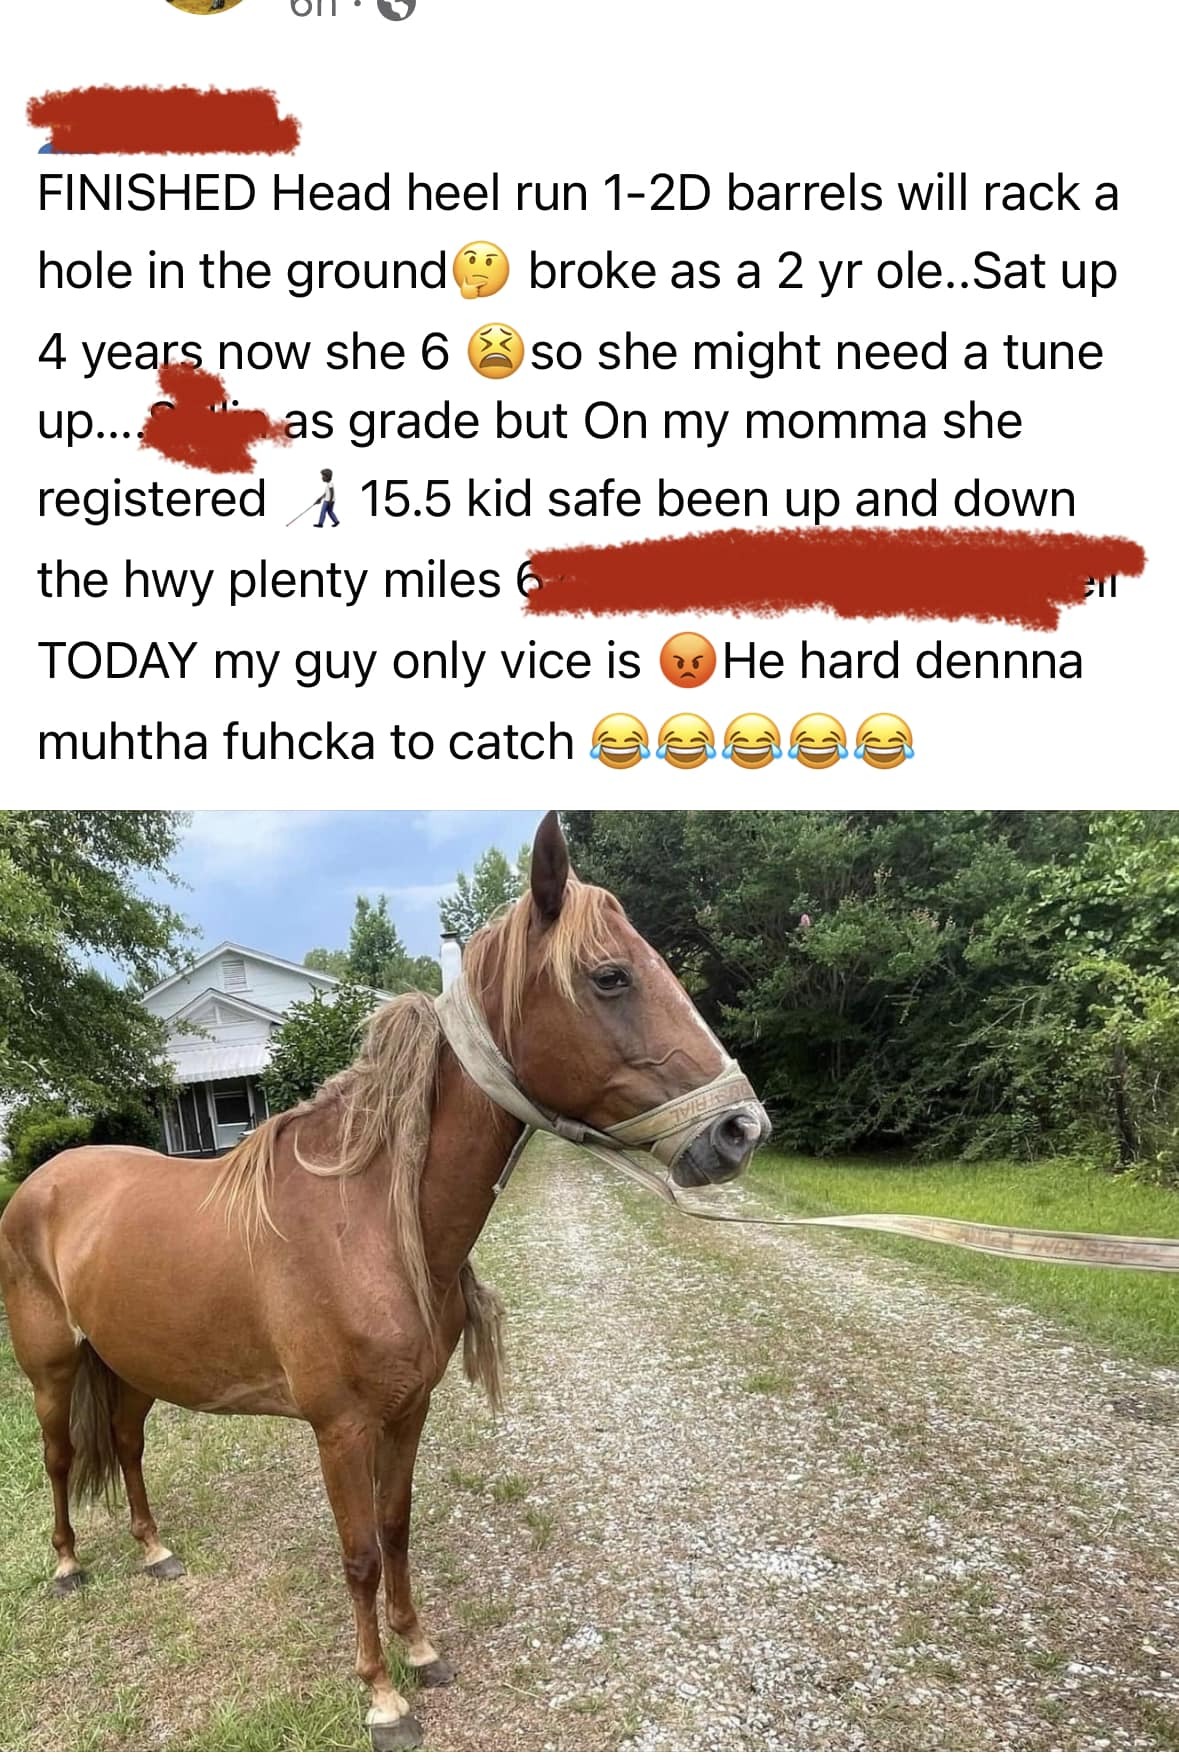 fucked up tumblr horses - fauna - Finished Head heel run 12D barrels will rack a hole in the ground 4 years now she 6 broke as a 2 yr ole..Sat up so she might need a tune as grade but On my momma she up.... registered 15.5 kid safe been up and down the hw